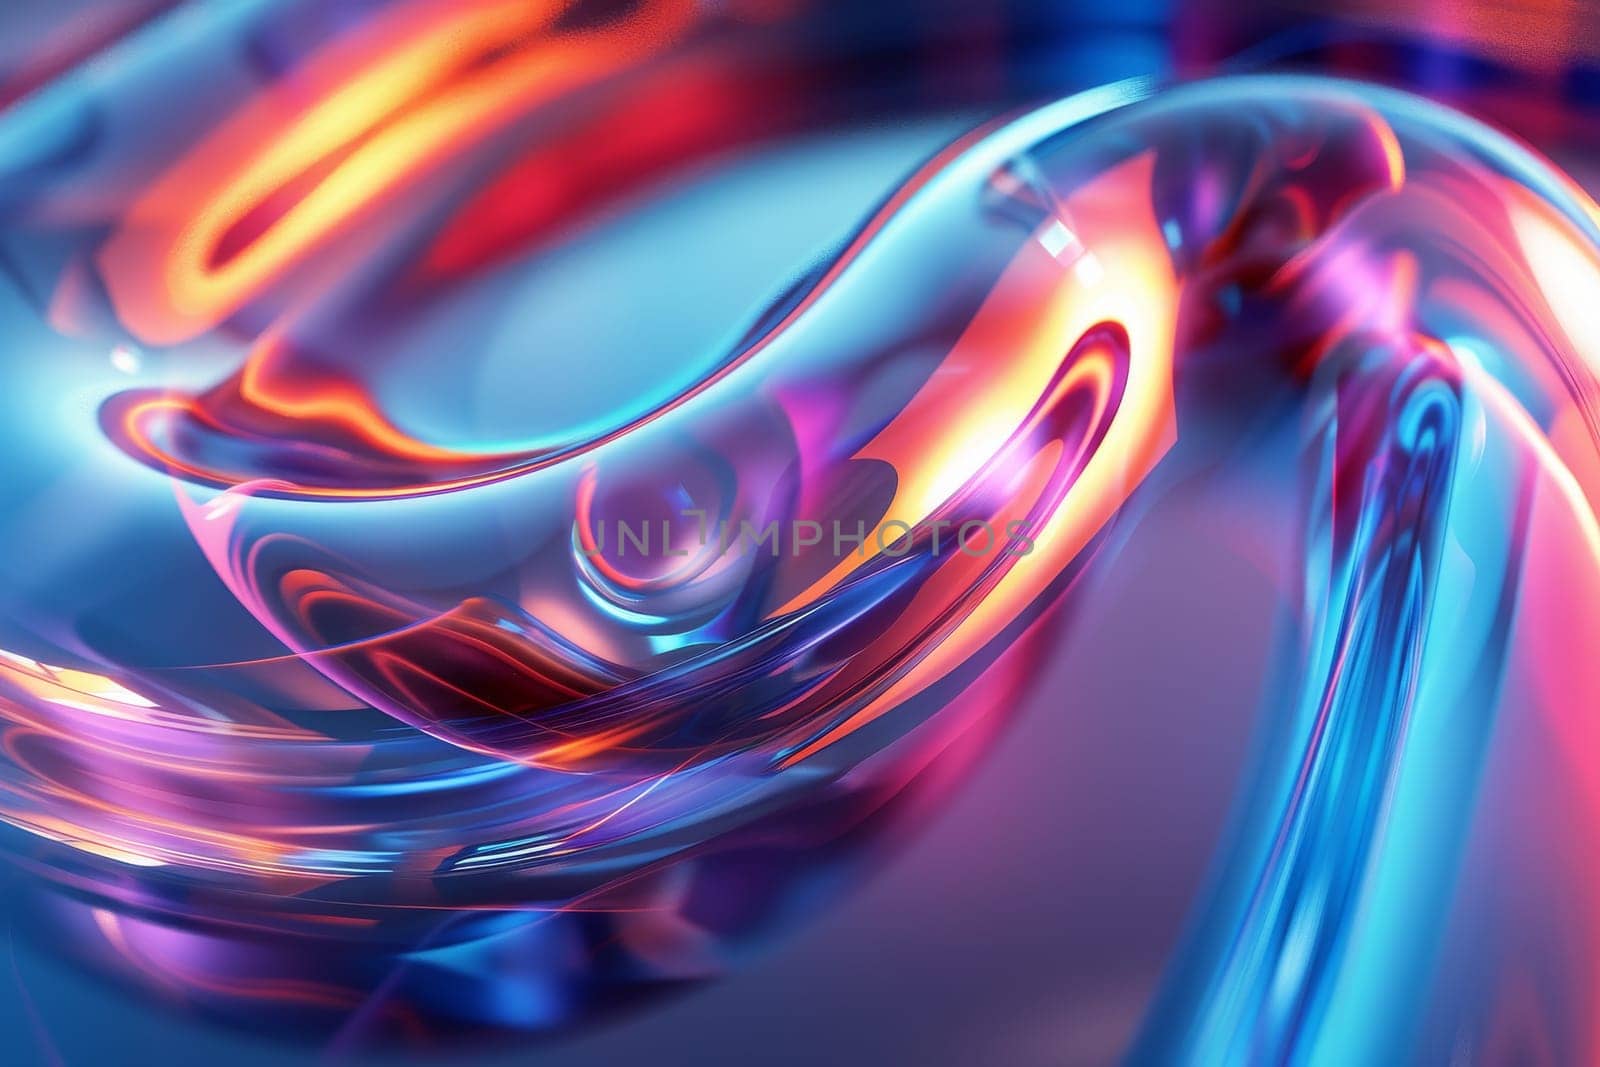 A shiny, colorful, and reflective surface with a red and orange swirl by itchaznong